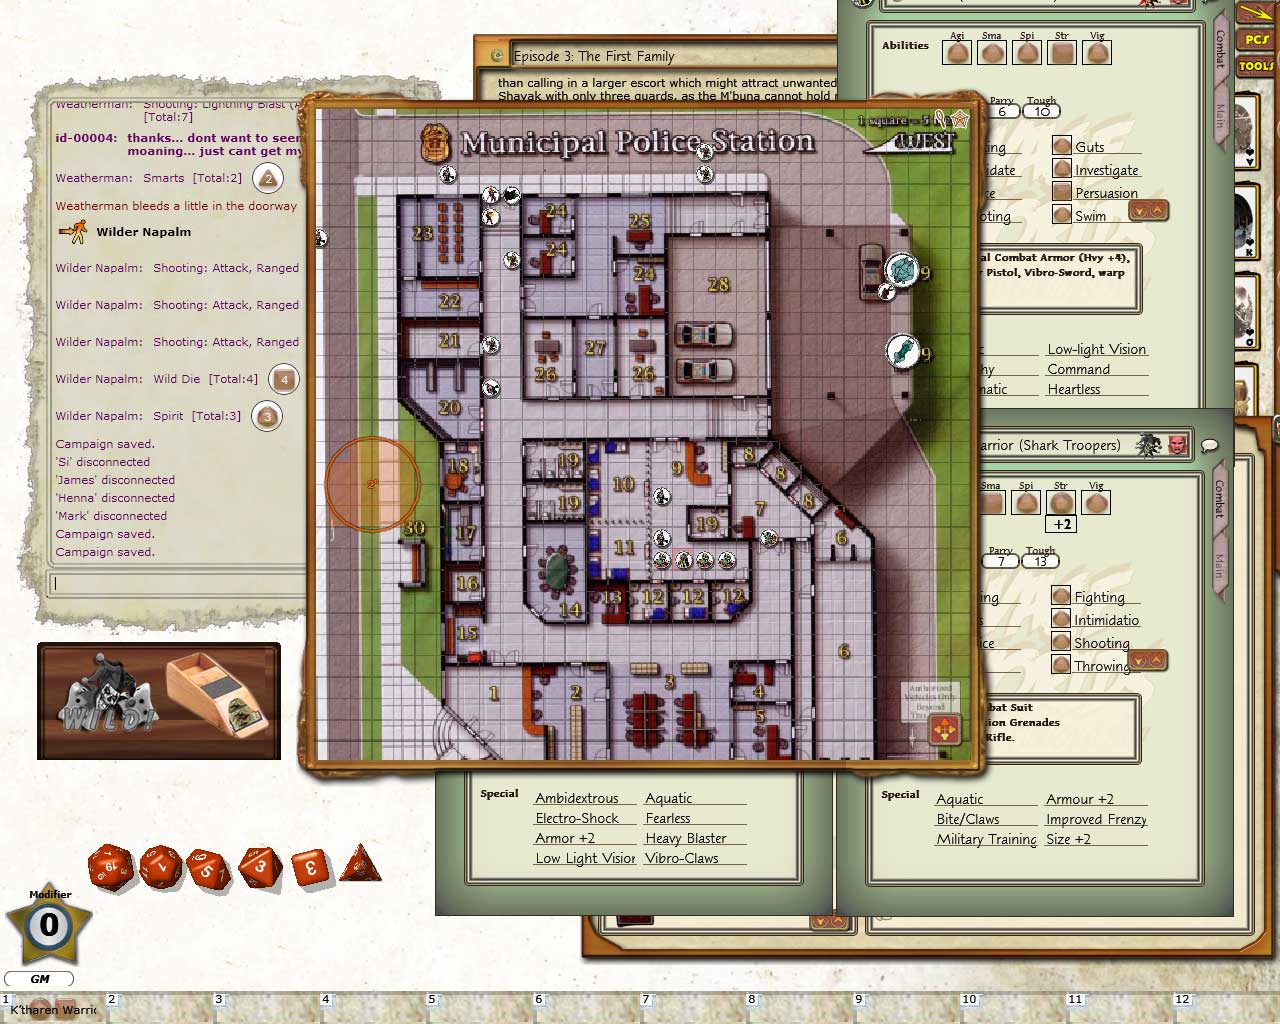 fantasy grounds ultimate steam